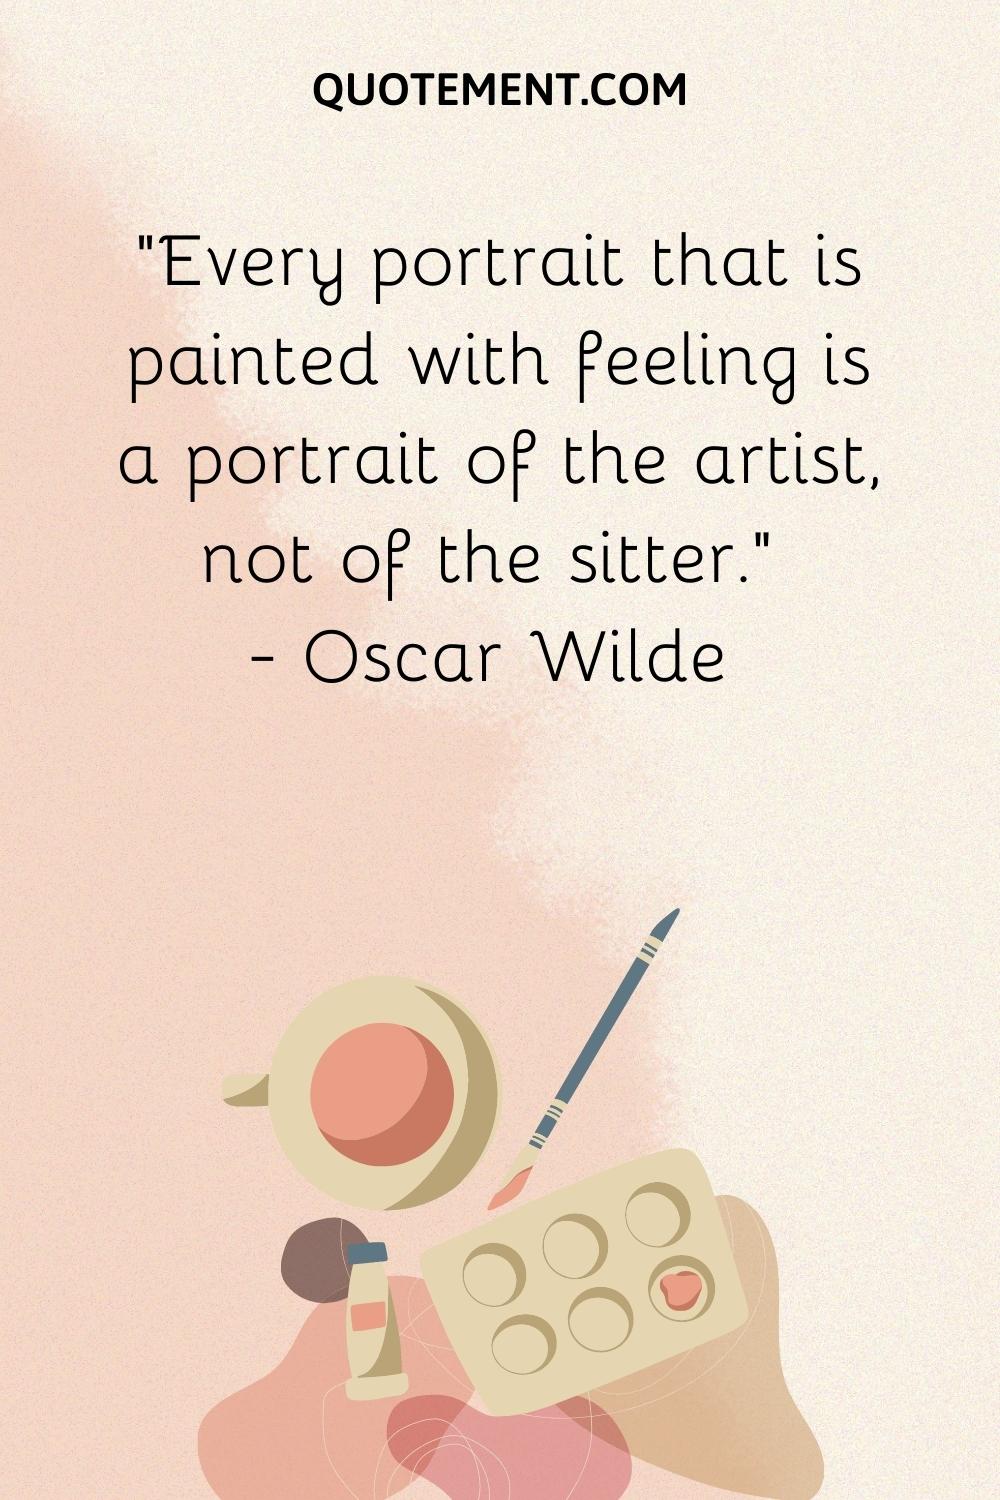 Every portrait that is painted with feeling is a portrait of the artist, not of the sitter